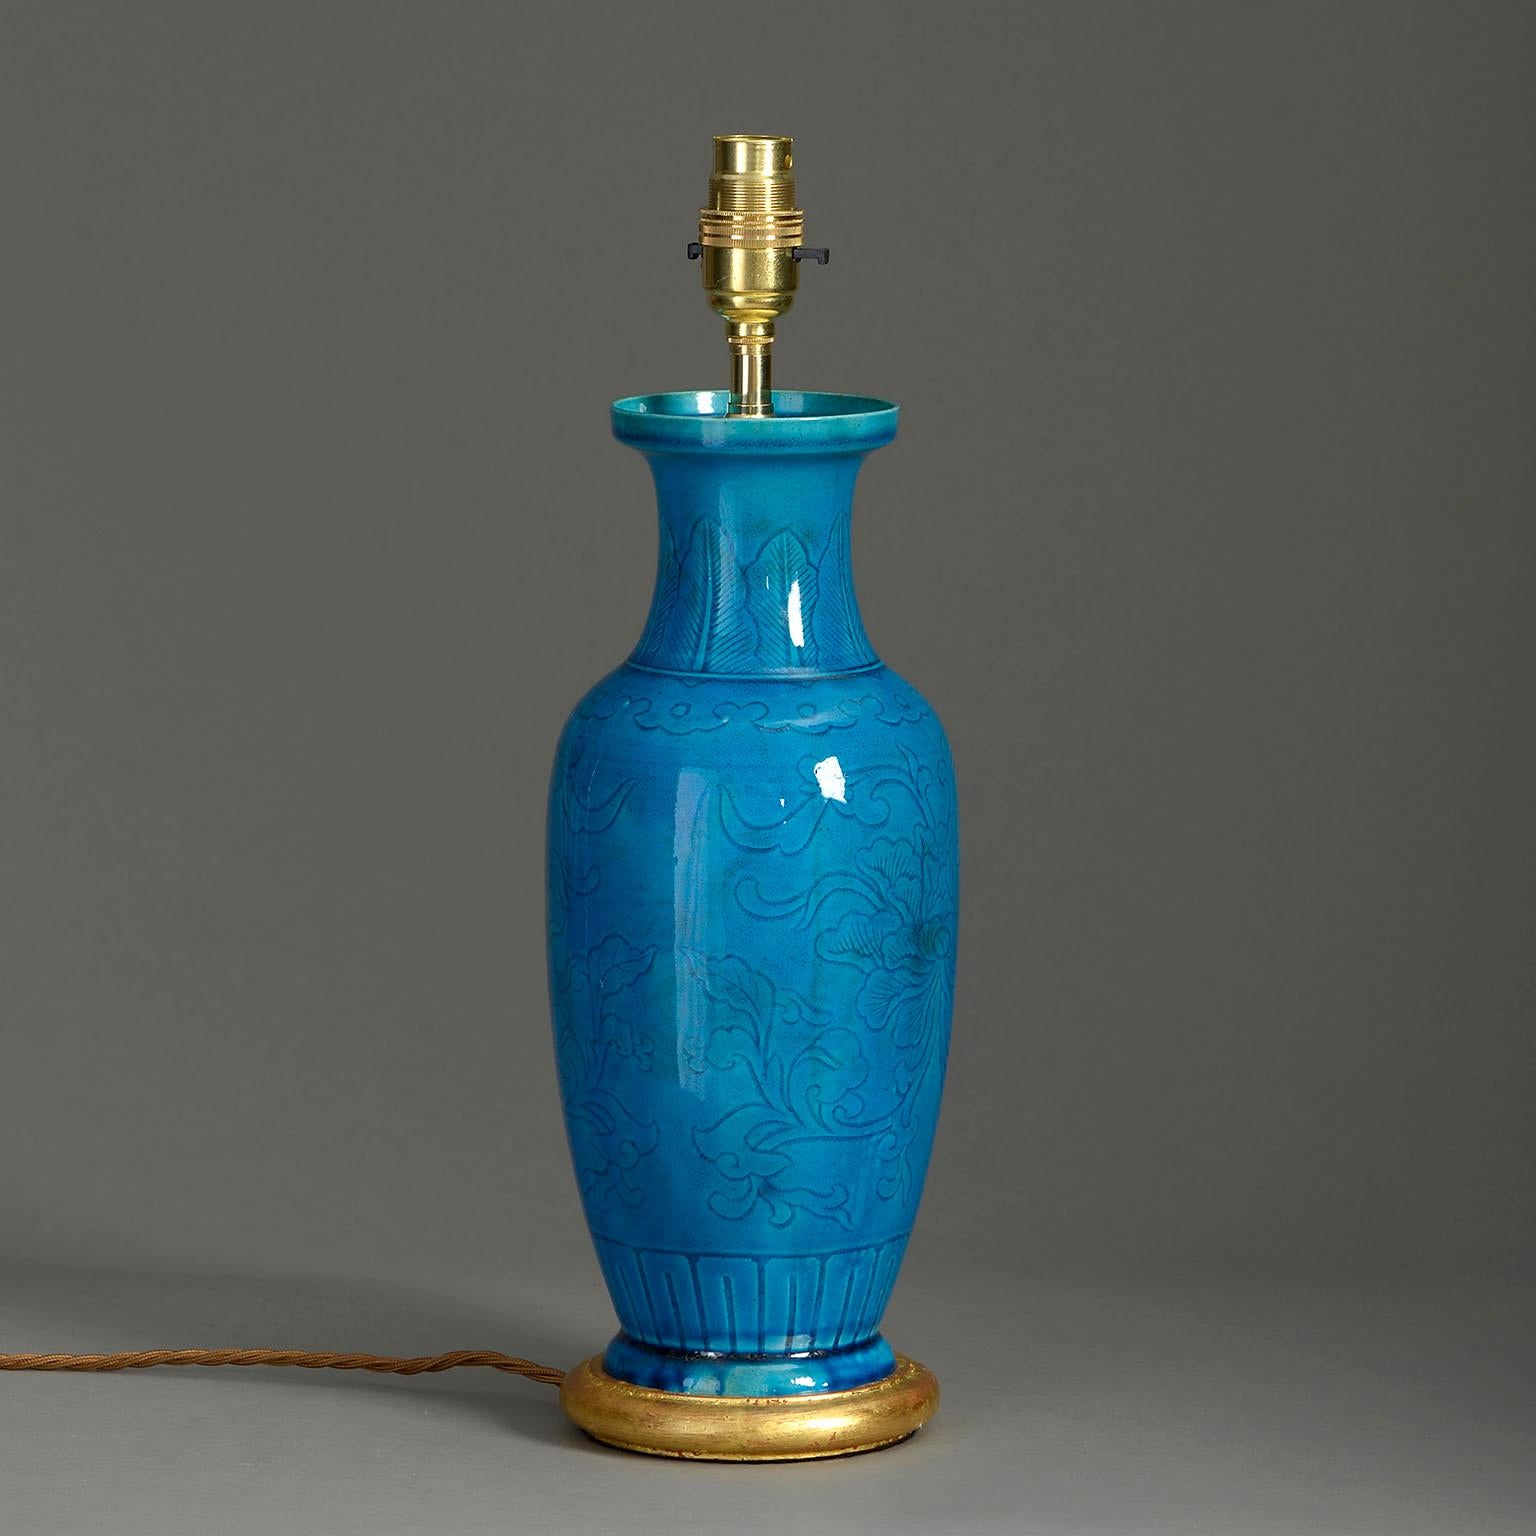 A nineteenth century baluster vase of medium scale with rich turquoise glaze, the body with incised decoration. Now mounted on a hand-turned water gilded base.

Dimensions refer to vase and base.

Shade not included.

This vase lamp with its